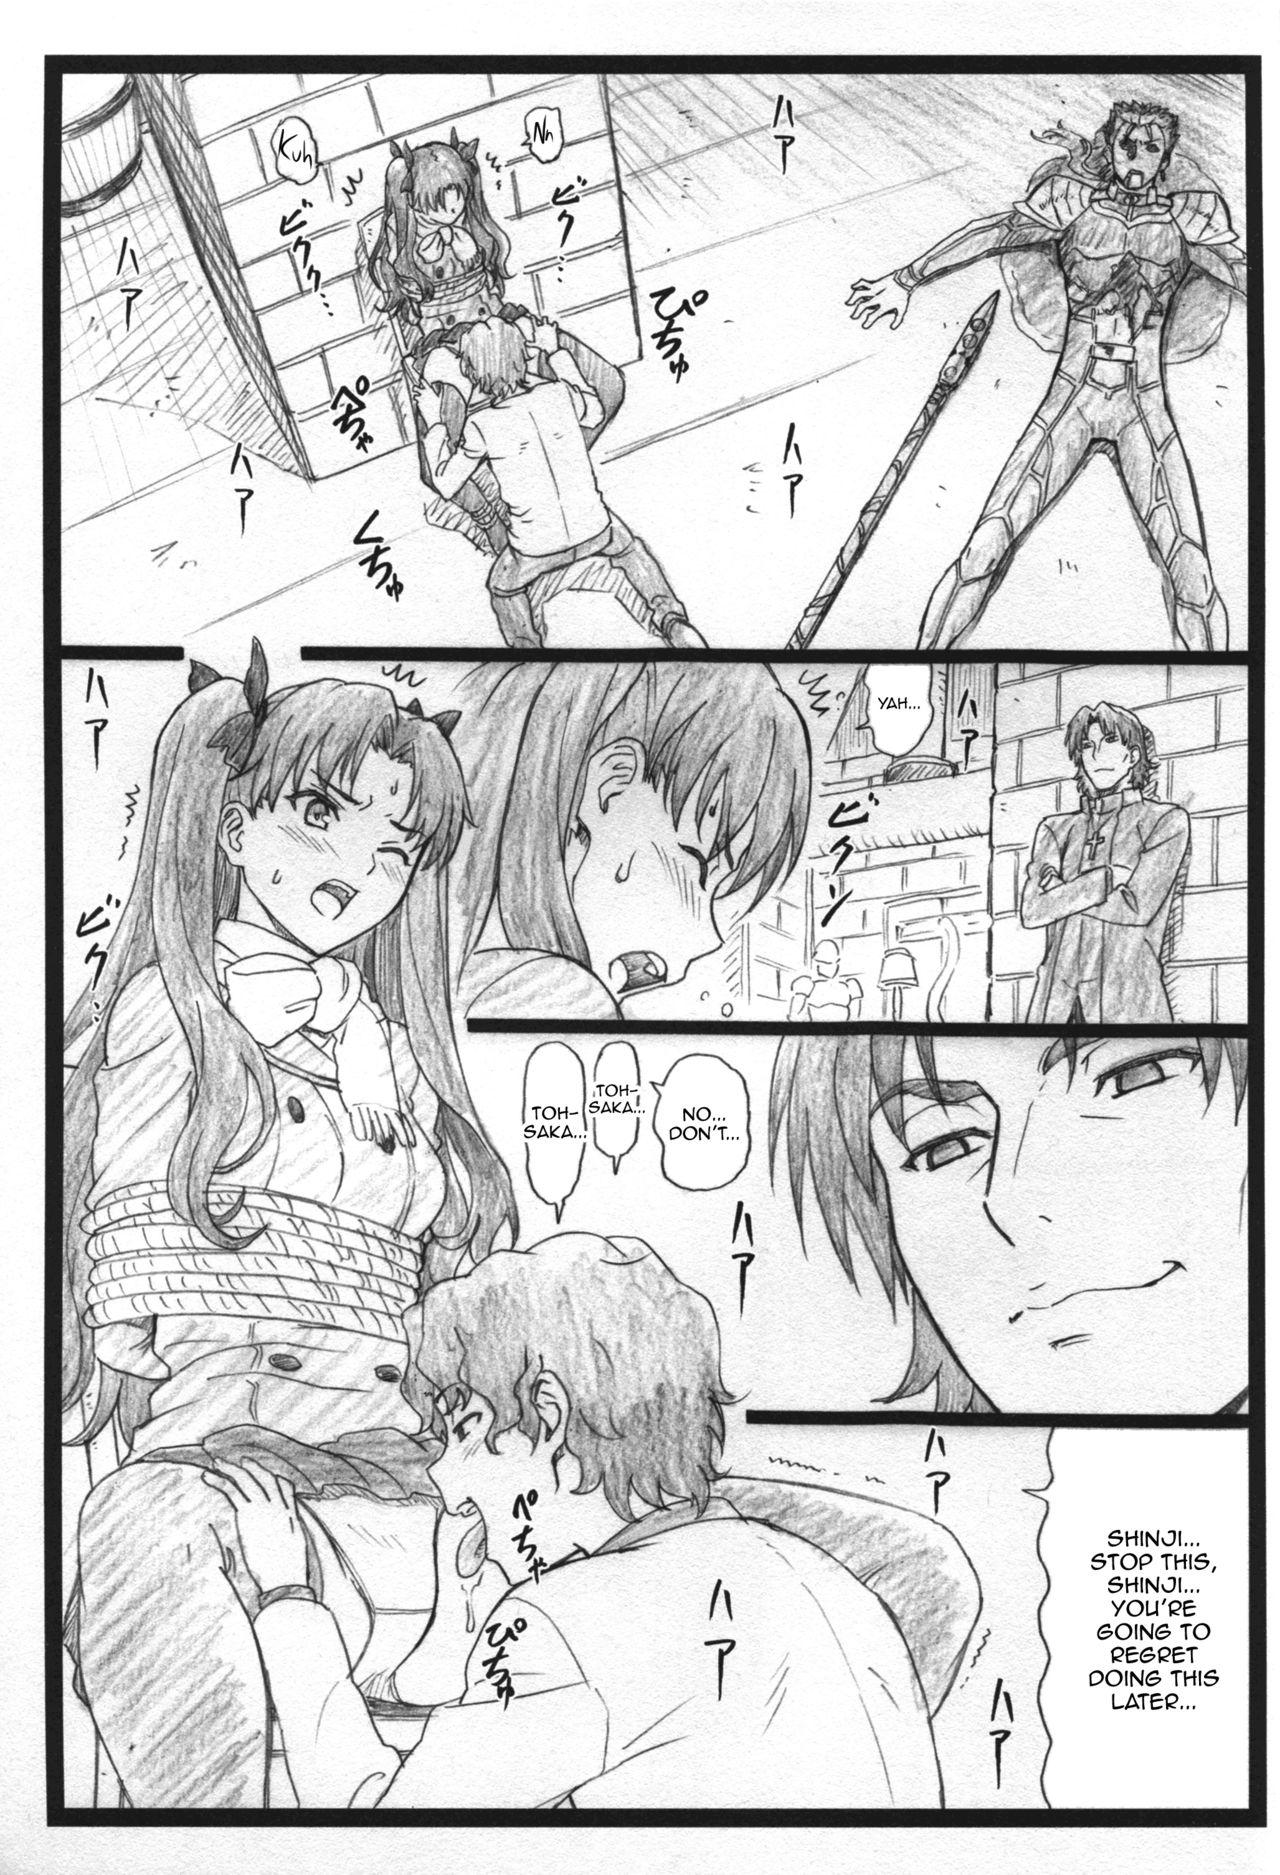 Tugging Rin to Shite... | With Rin... - Fate stay night Interracial Hardcore - Page 3